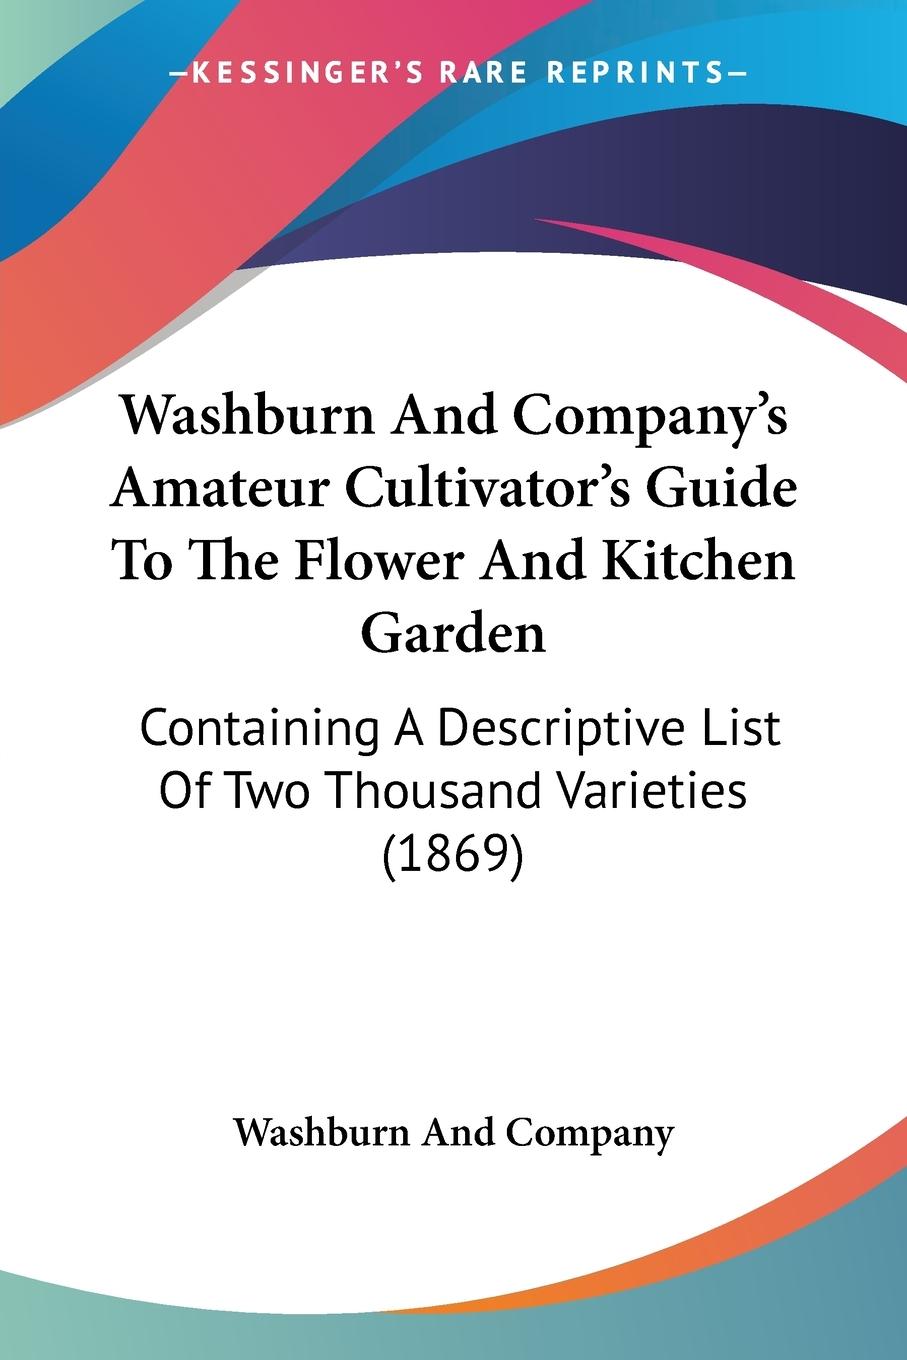 Washburn And Company s Amateur Cultivator s Guide To The Flower And Kitchen Garden - Washburn And Company